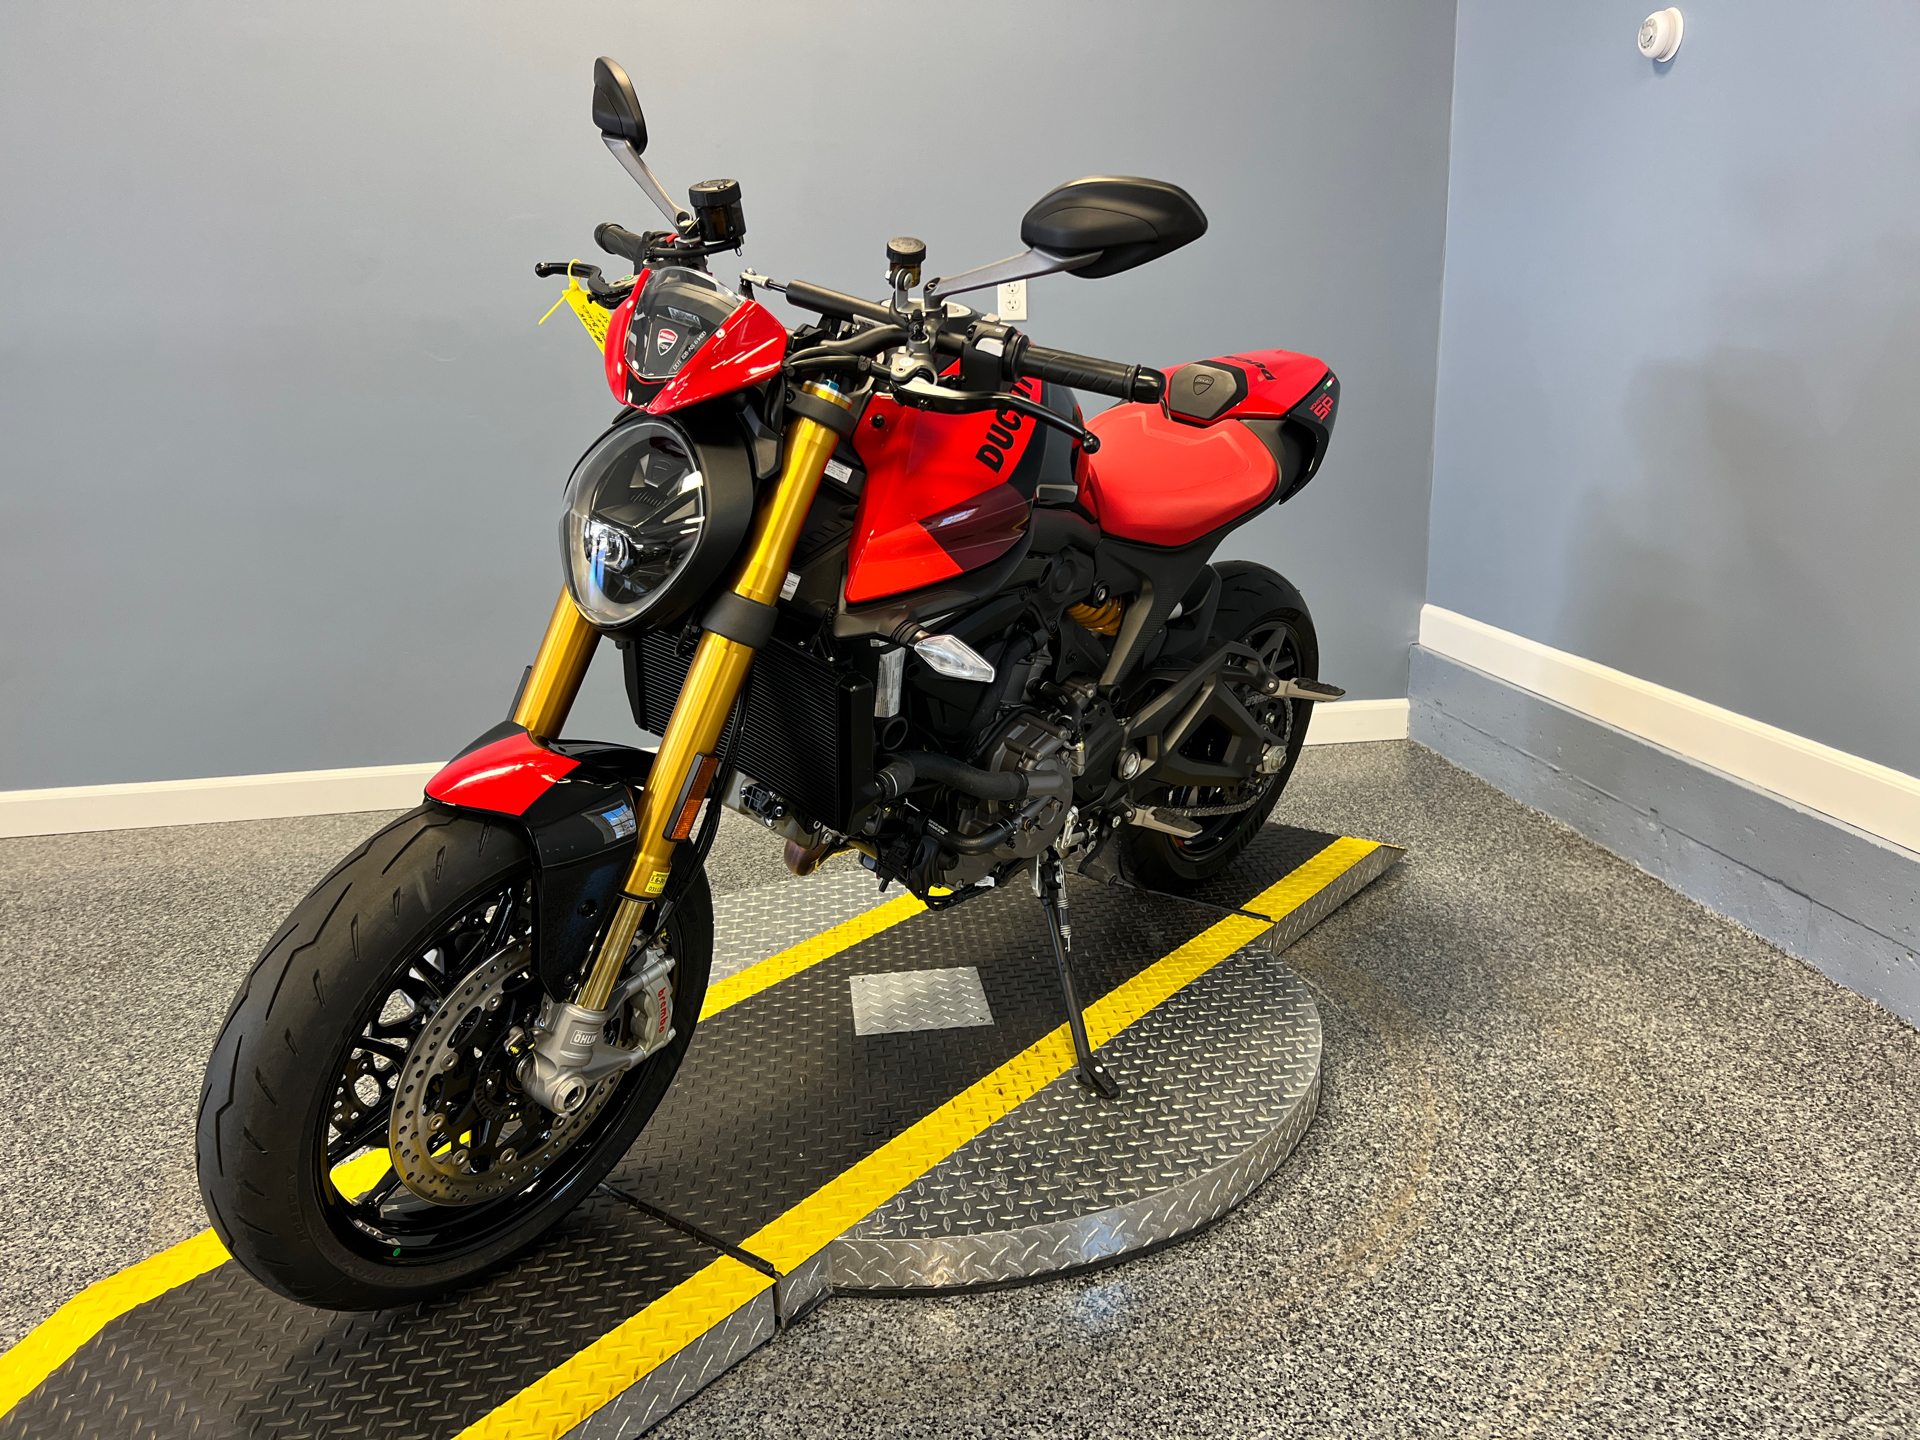 2024 Ducati Monster SP in Meredith, New Hampshire - Photo 4